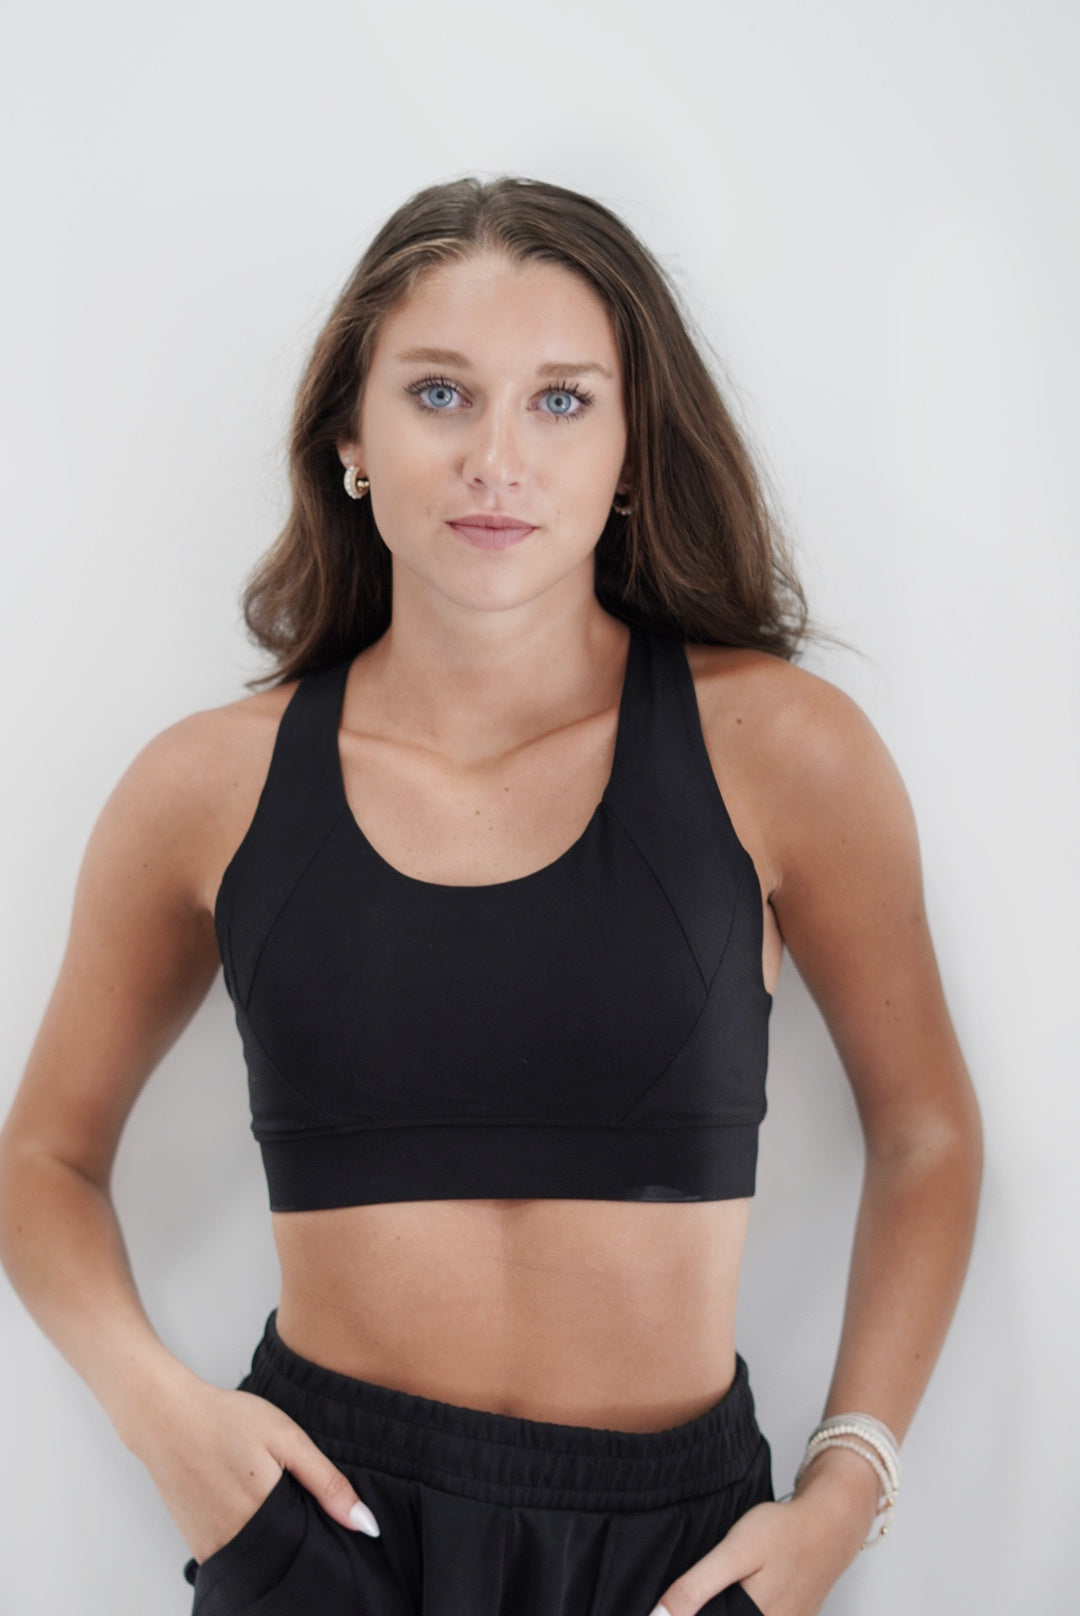 Callie Criss Cross Padded Sports Bra Thick Strap Sleeveless Criss Cross Detail On Back Tight Waistband on bottom of Bra Tighter Fit Color, Black 84% Poly Microfiber, 16% Spandex, Wash with like colors Model is wearing size small 